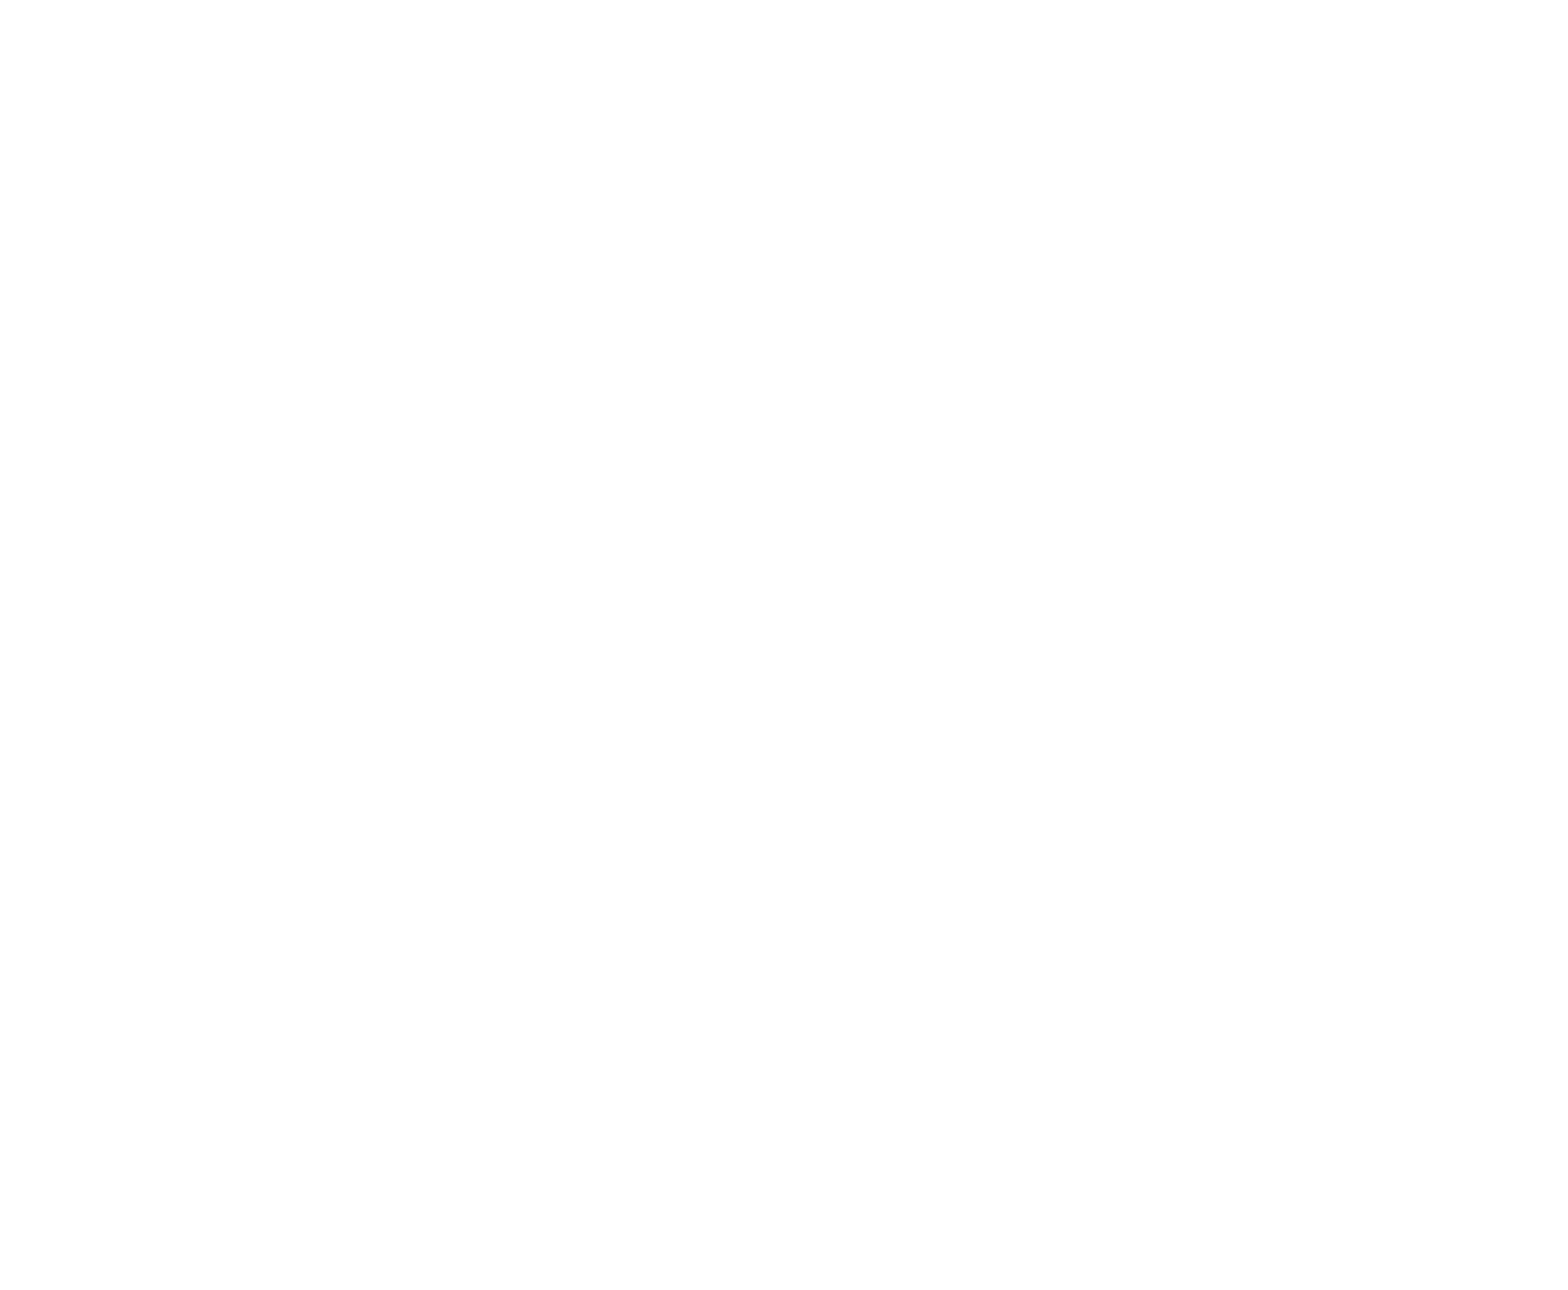 WA OWNED AND OPERATED - WHITE